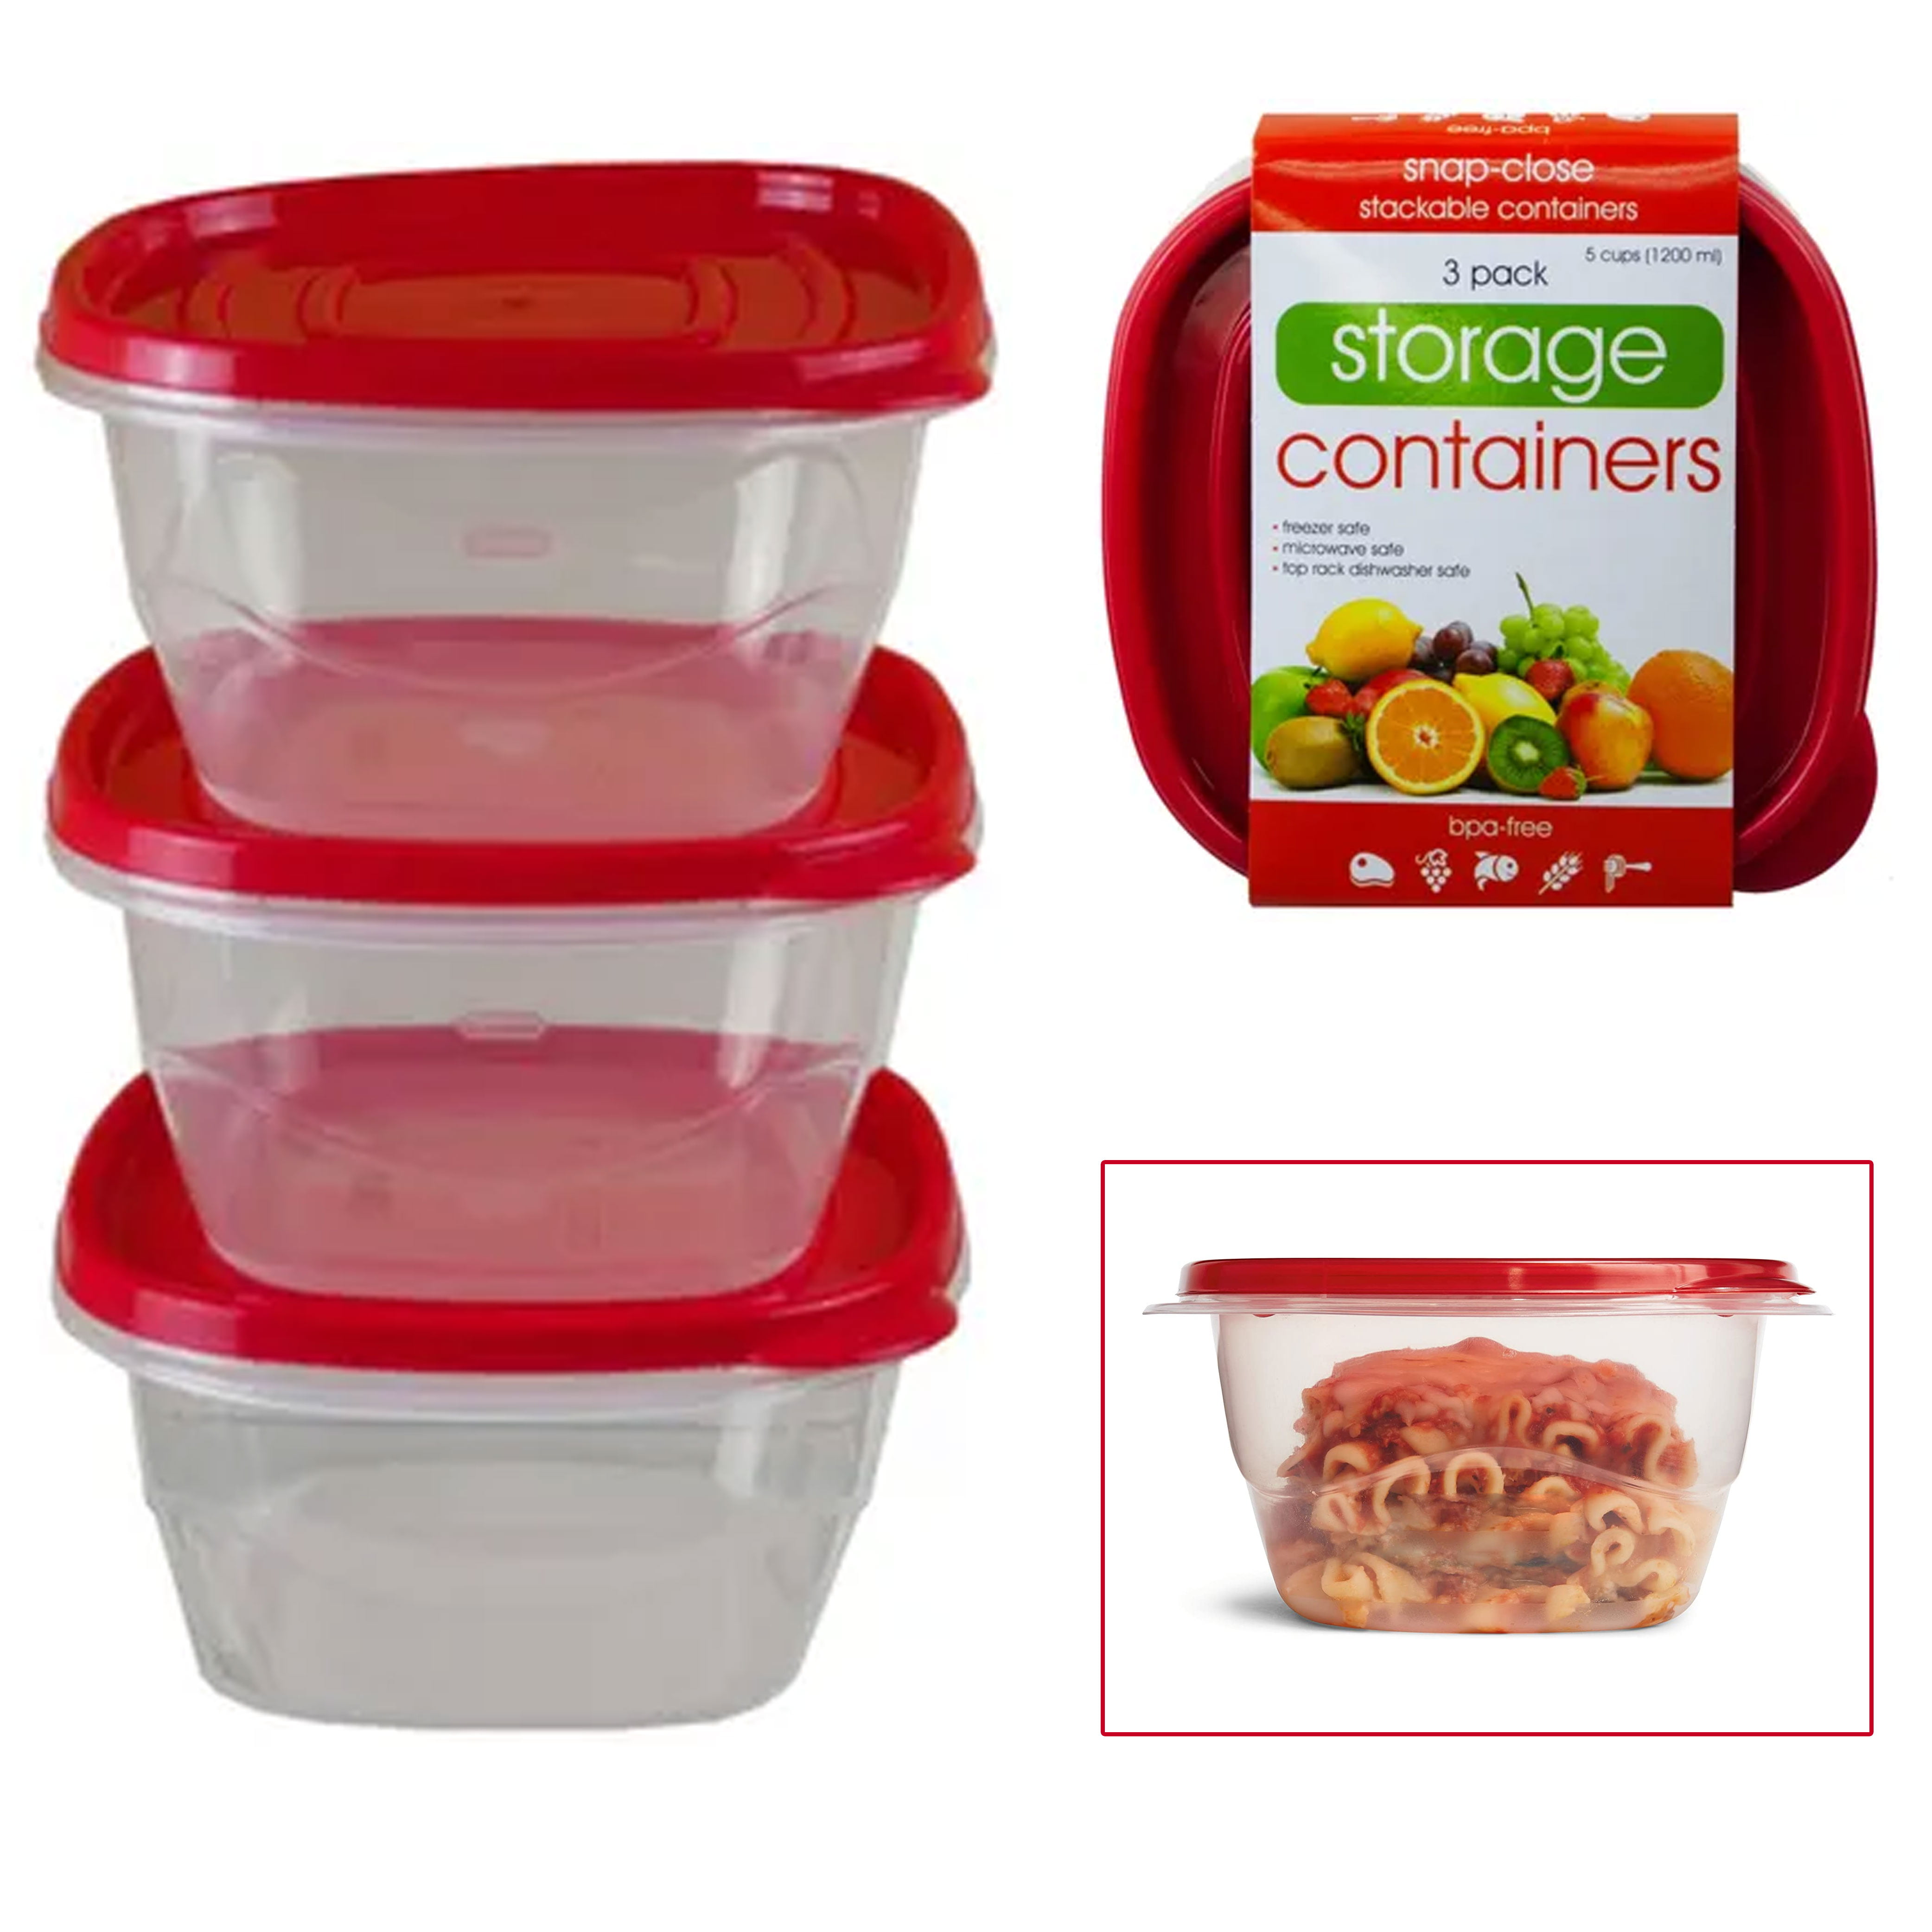 20Pcs Pioneer Woman Vintage Floral Food Storage Containers Bowls w/lid Set *Red*